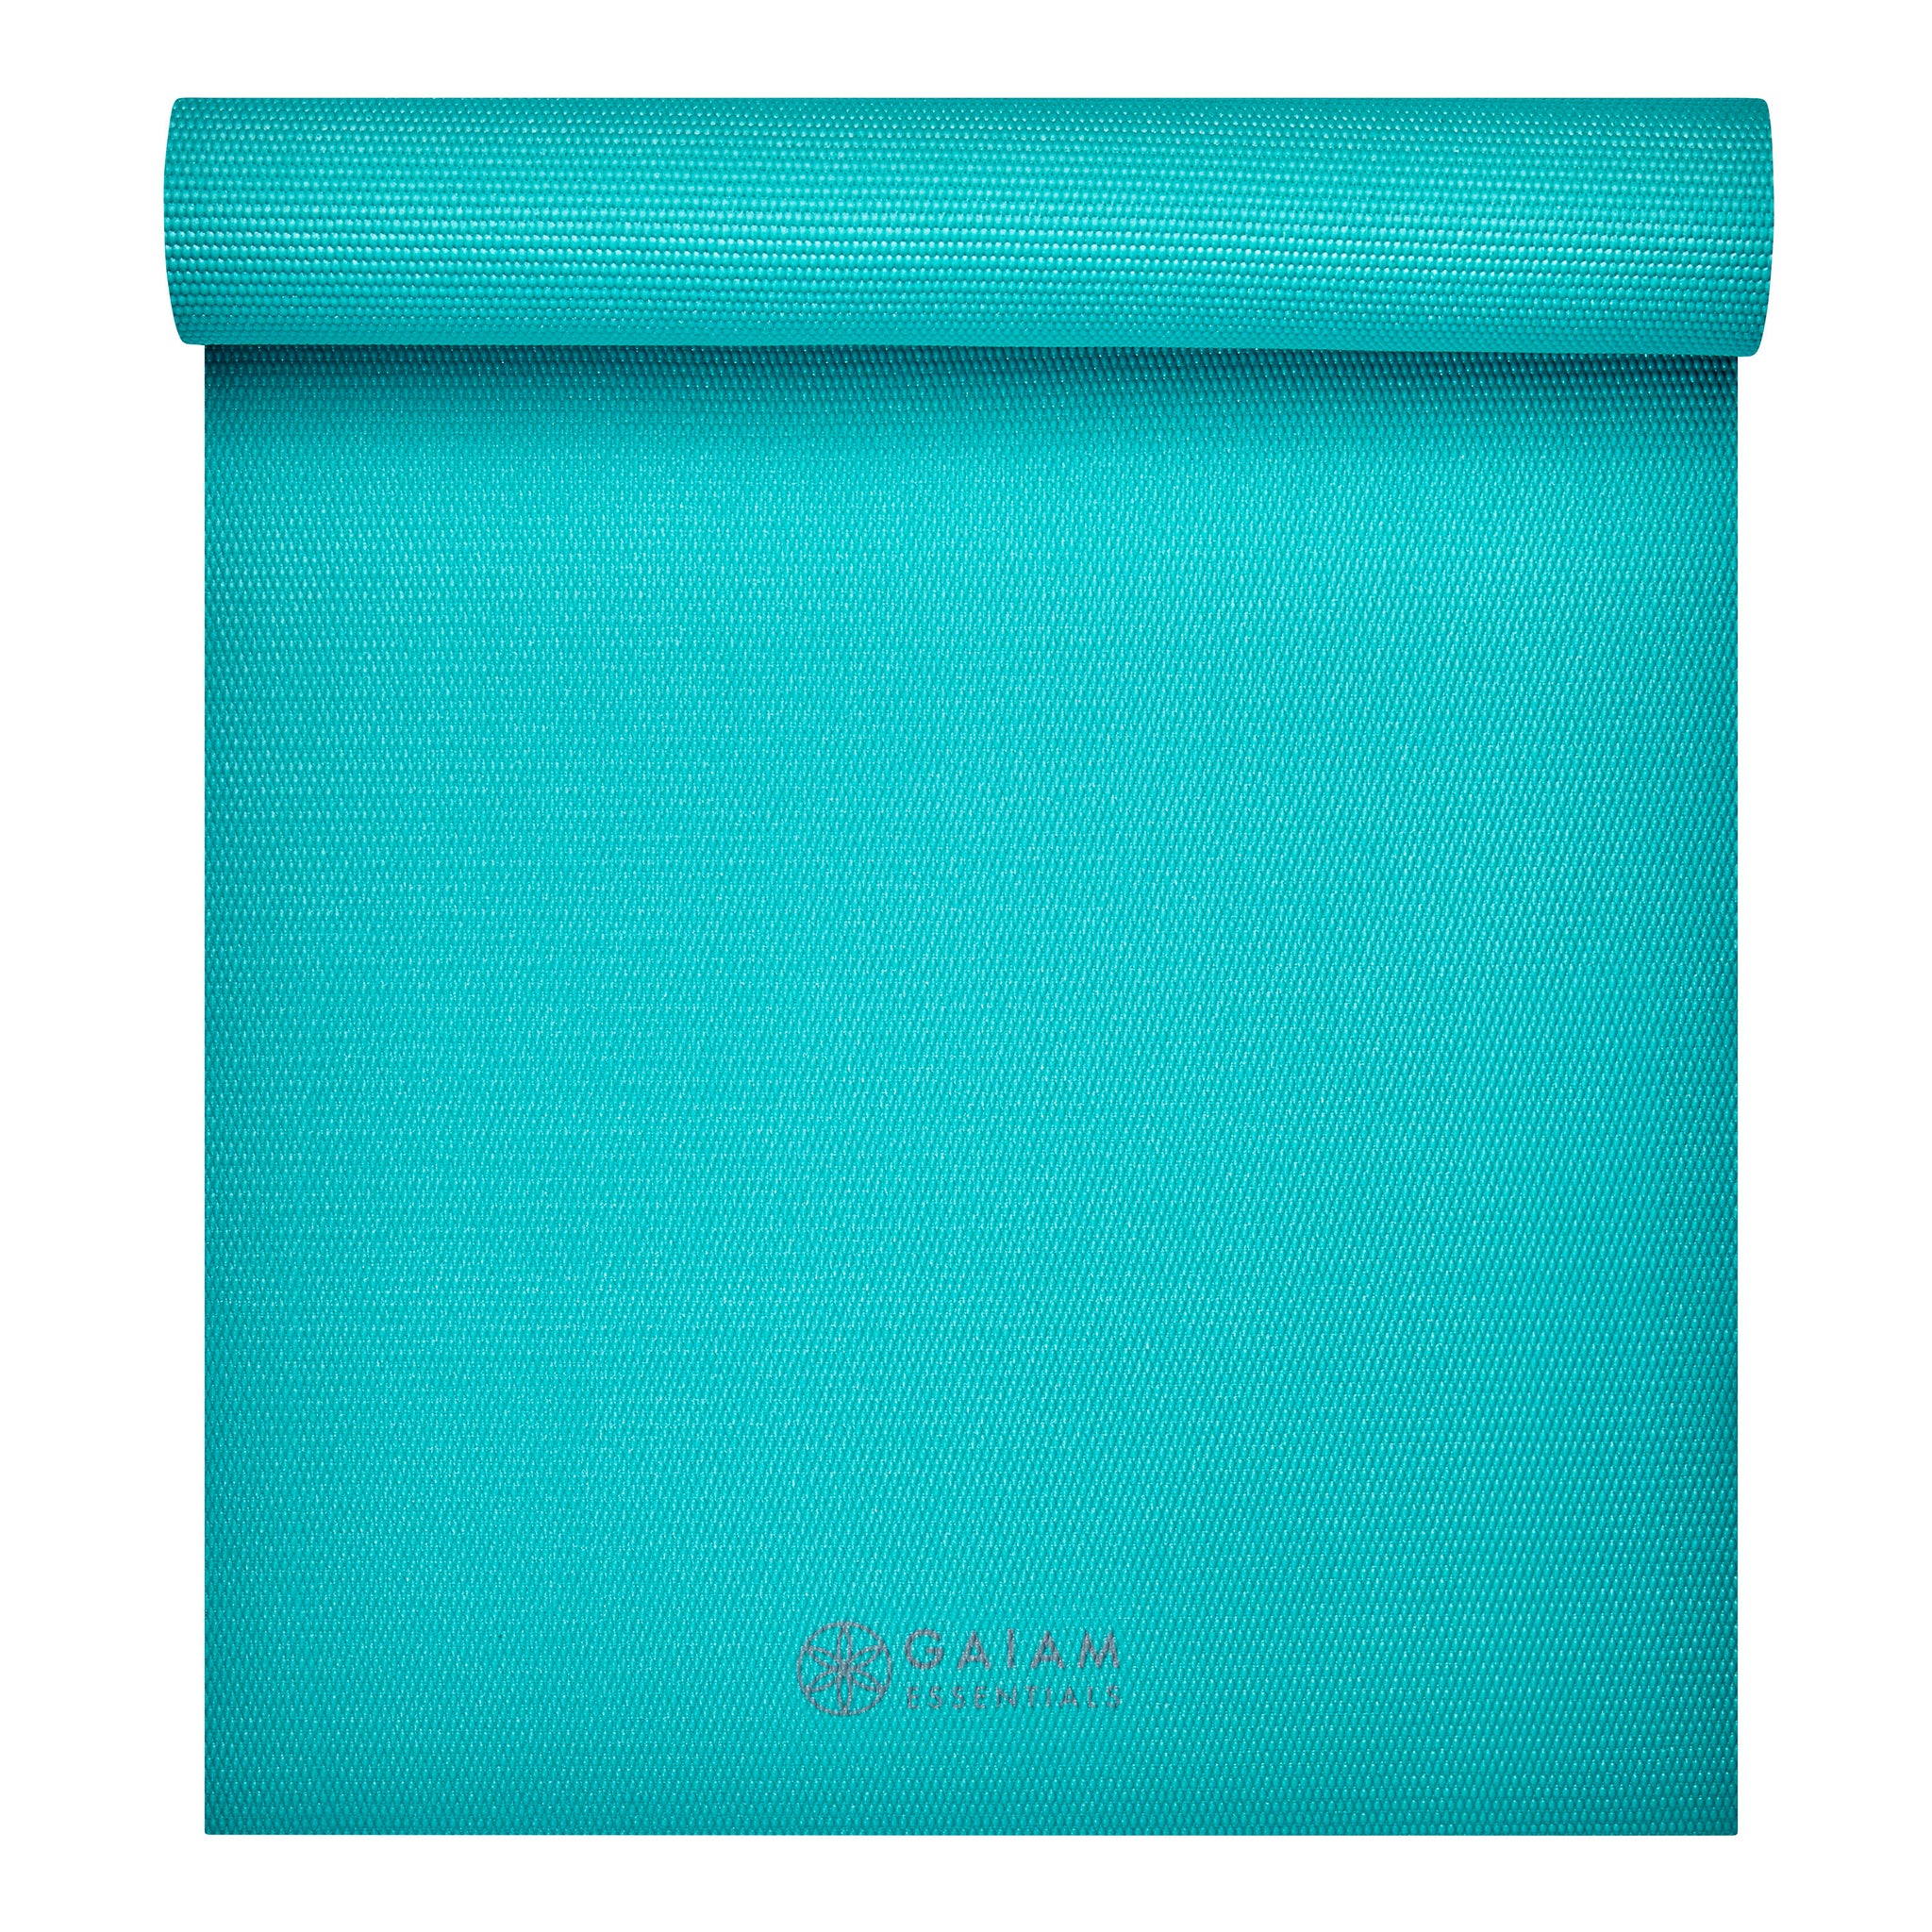 Gaiam Essentials Thick Yoga Mat Fitness & Exercise Mat with Easy-Cinch Yoga  Mat Carrier Strap, Green, 72 InchL x 24 InchW x 2/5 Inch Thick 